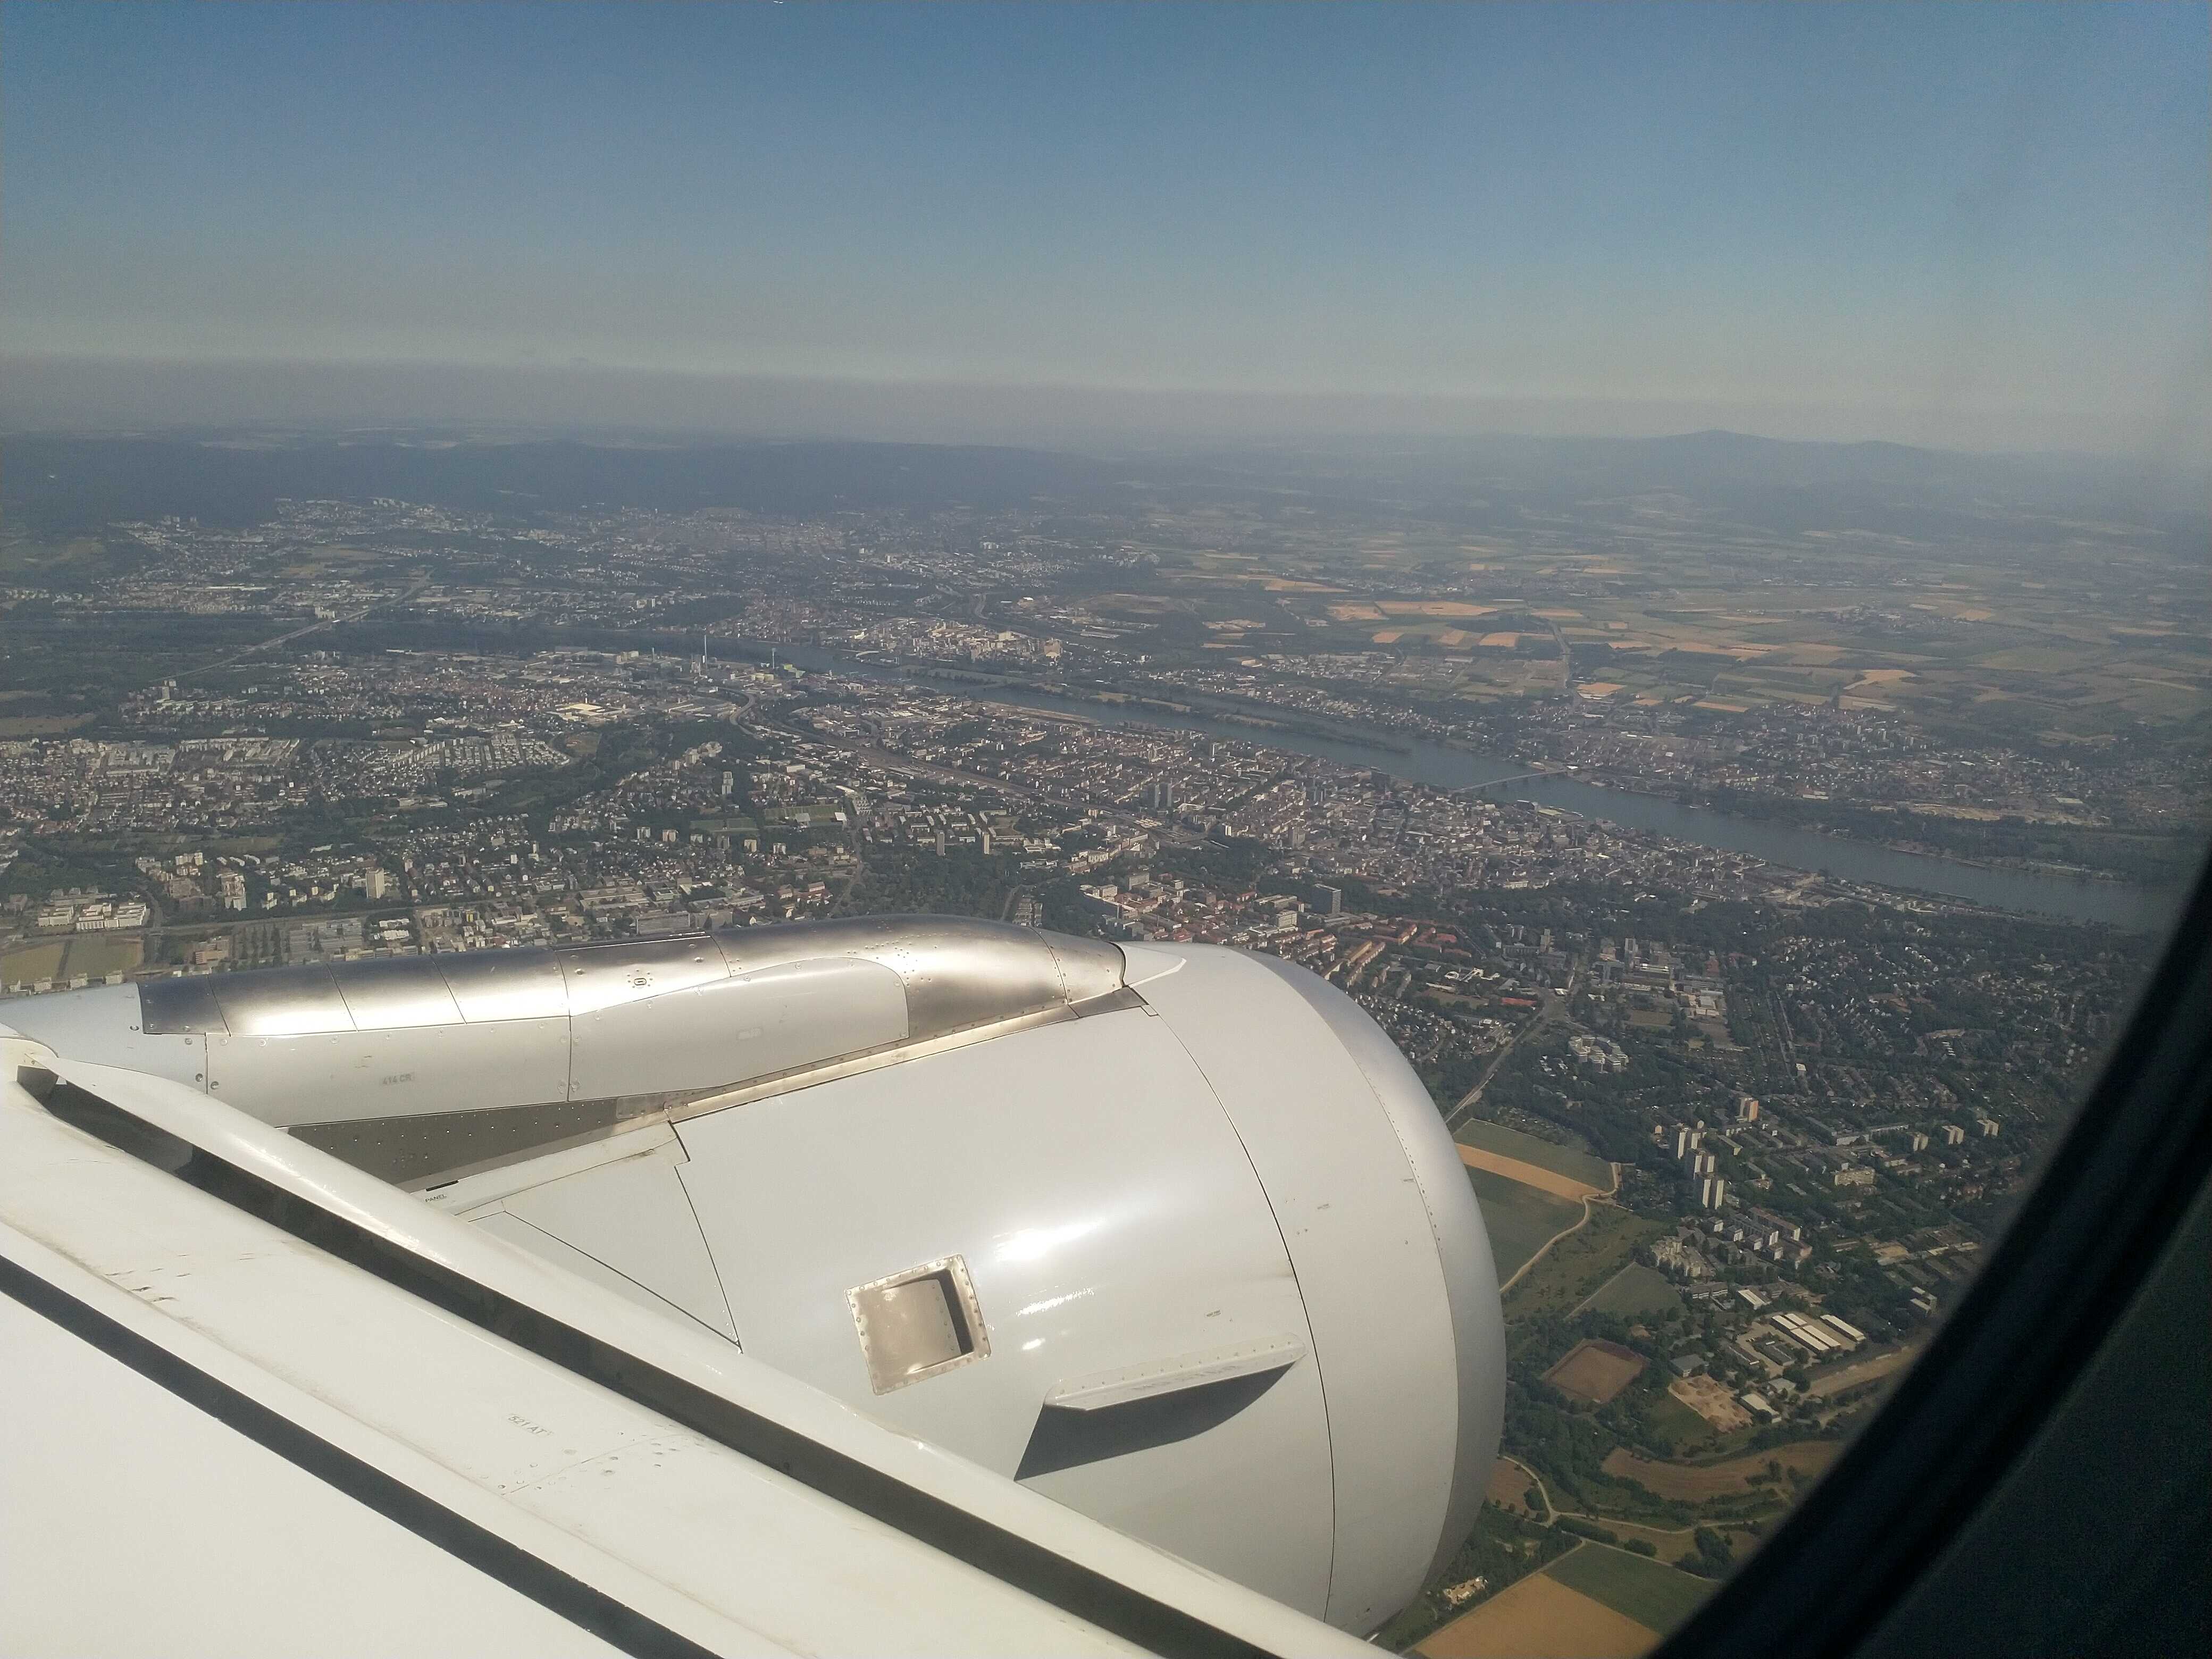 Mainz seen from the plane.